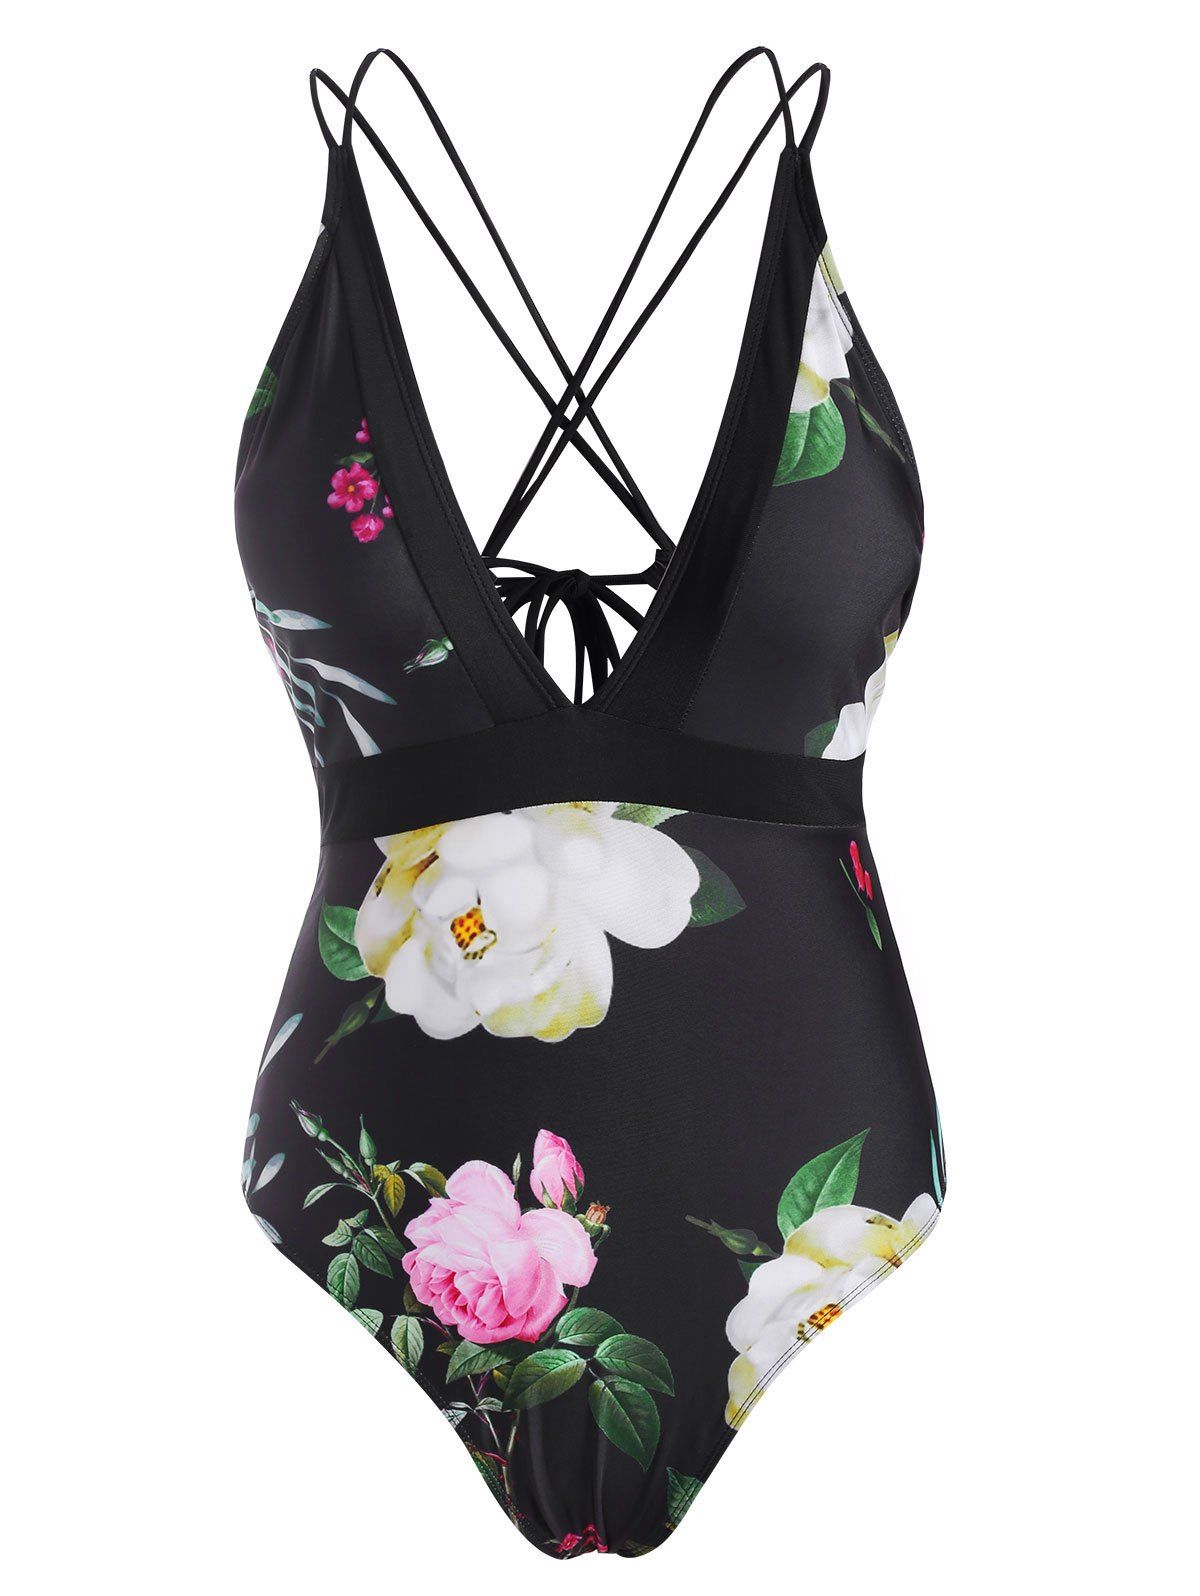 Strappy Lace Up Criss Cross Floral One-piece Swimsuit - BLACK M